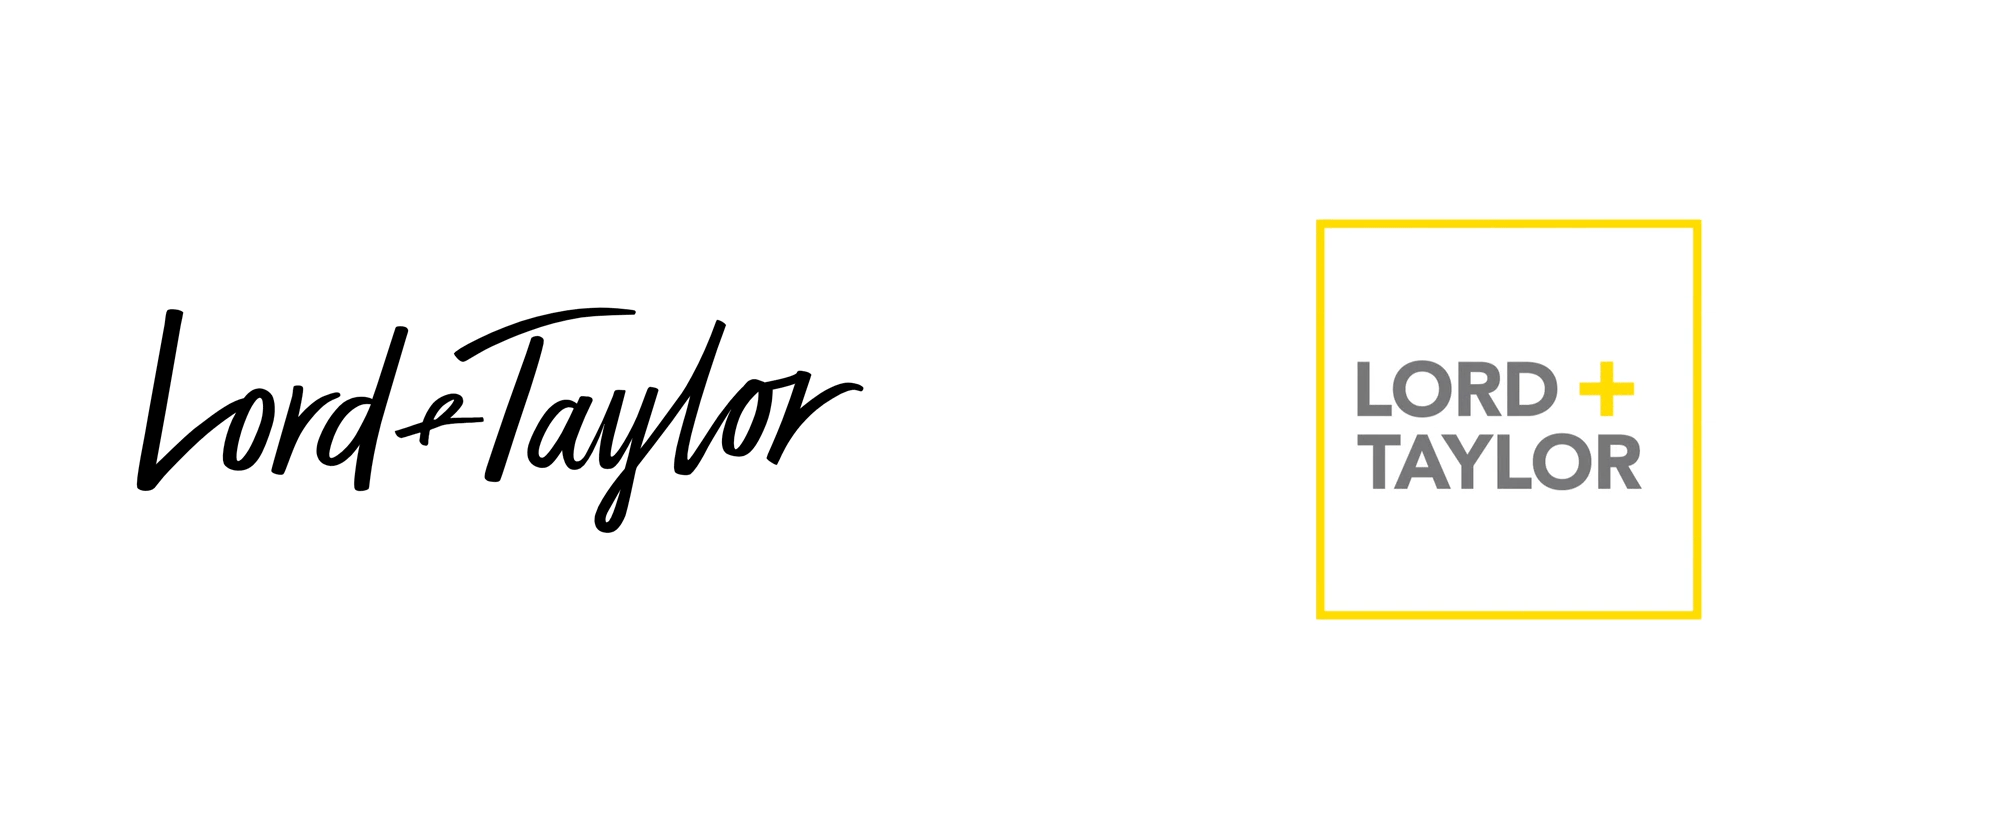 Taylor Logo - Brand New: New Logo for Lord + Taylor